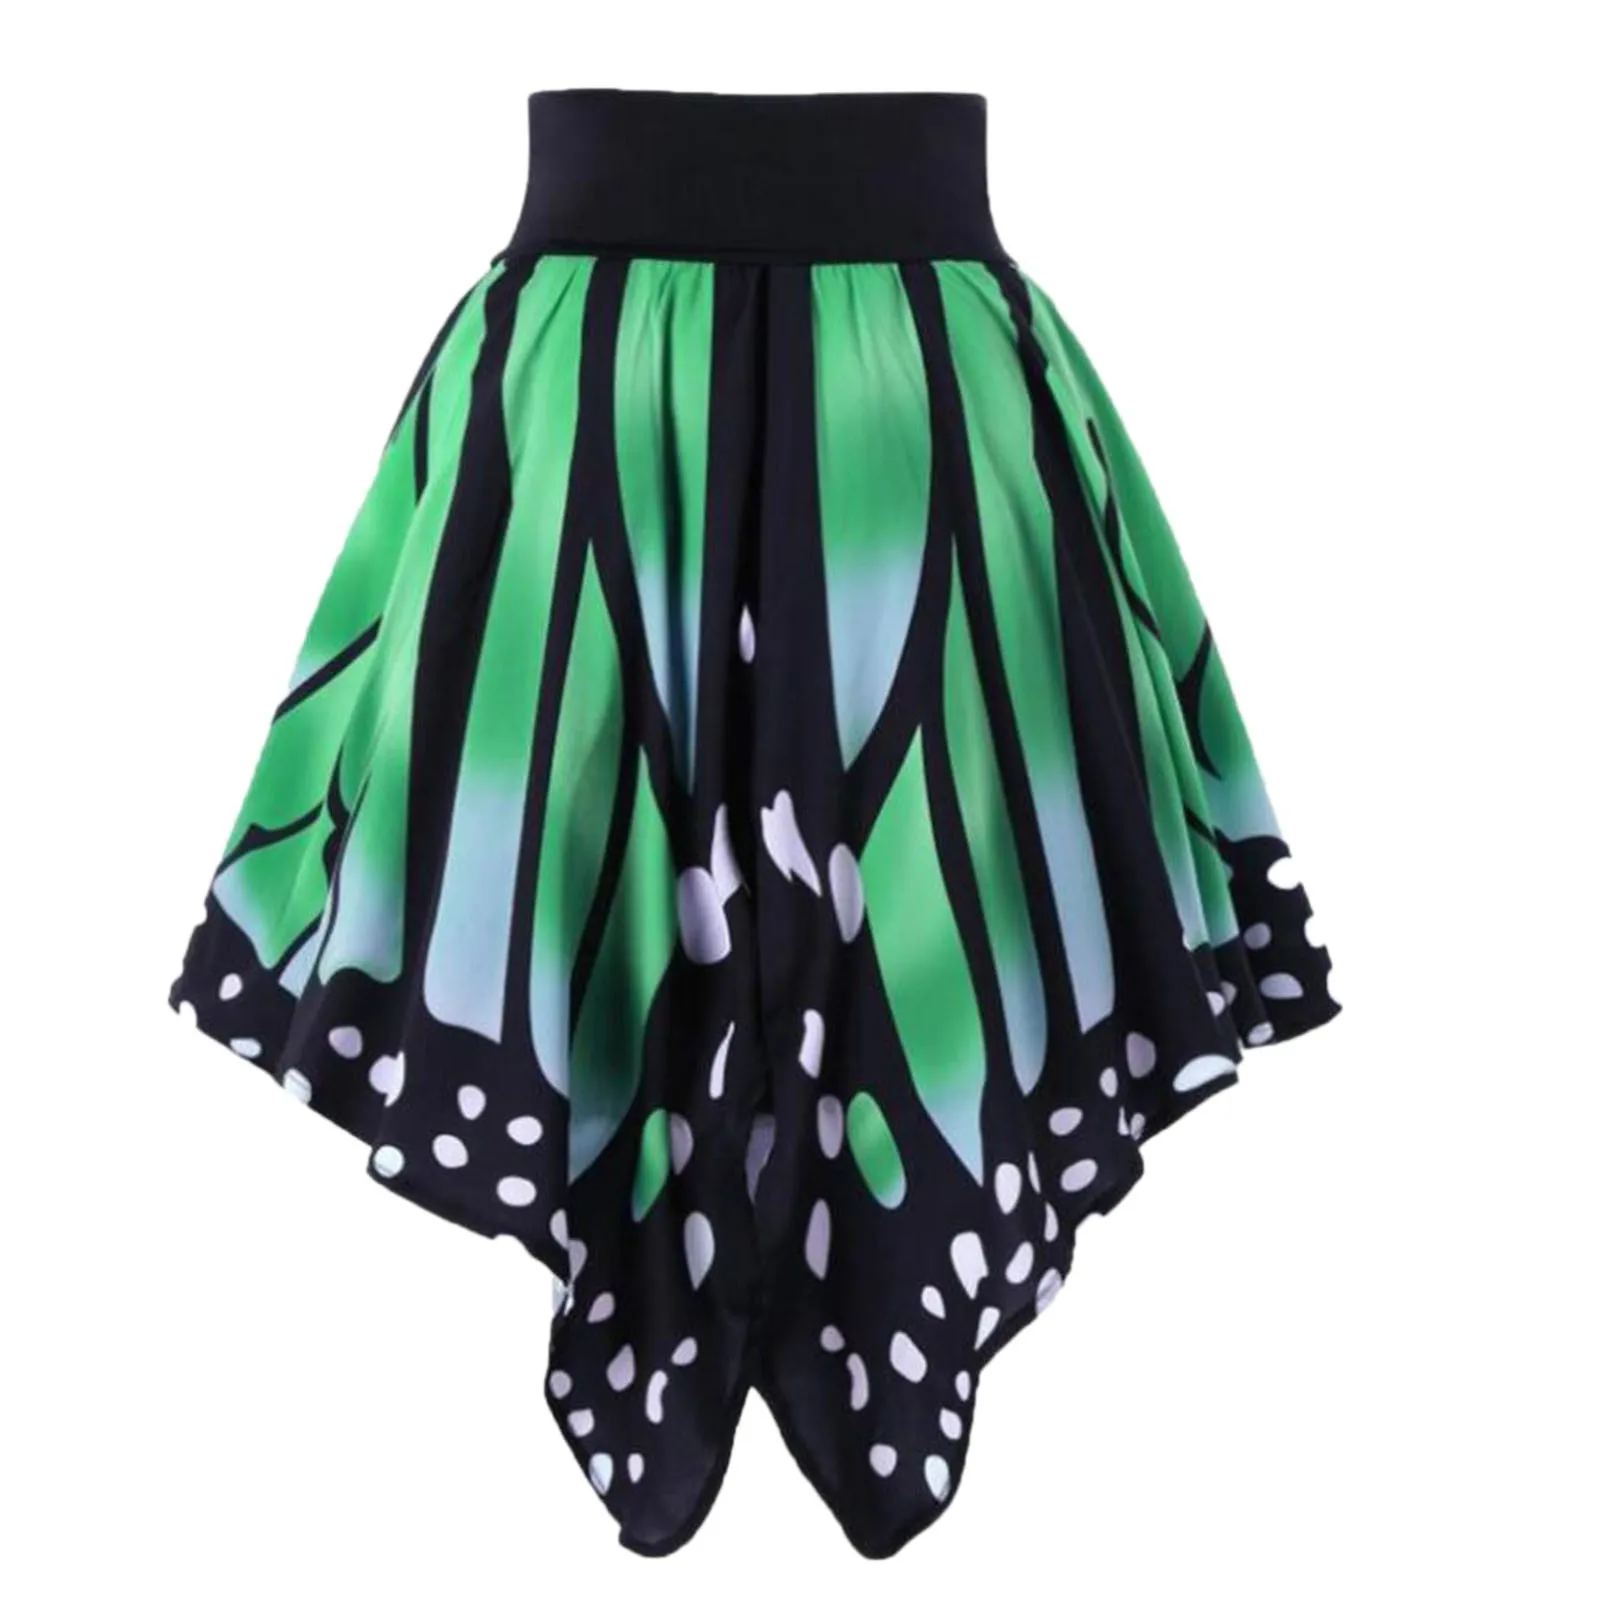 

Fashion Butterfly Gradient Skirts Women Girls Sexy High Waist Pleated Mini Skirt Patchwork Carnival Party Costume Jupe Femme